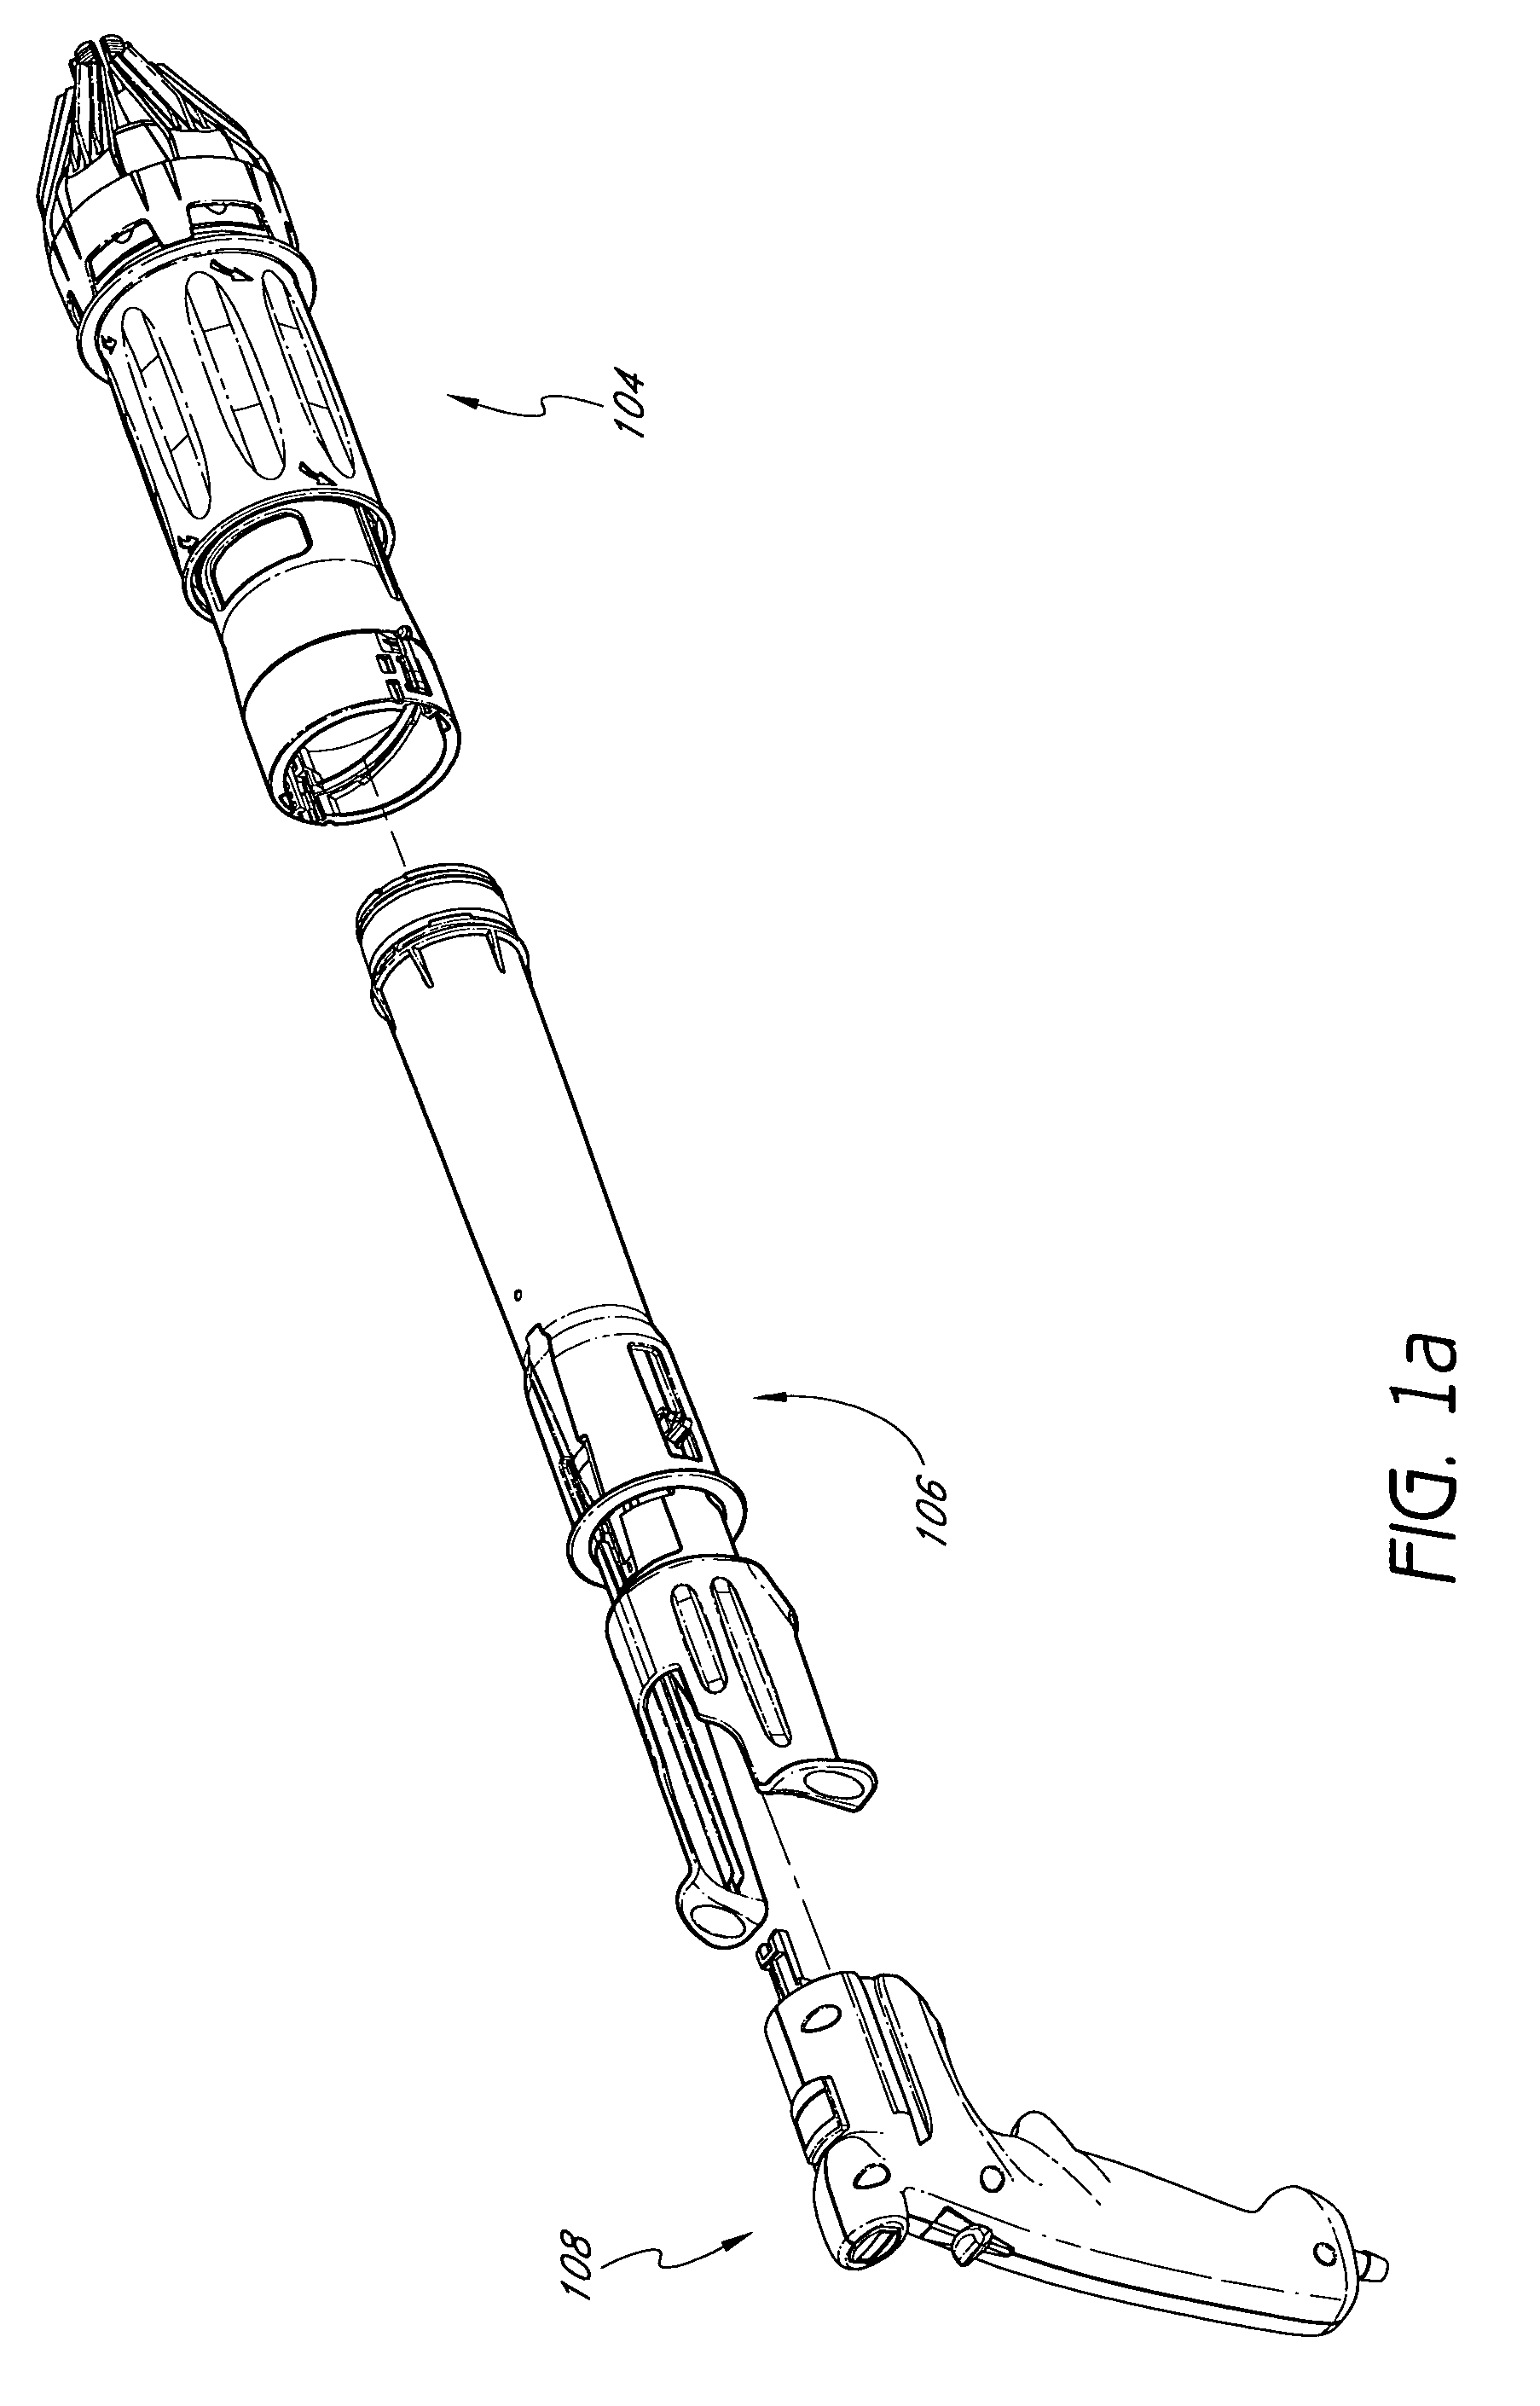 Device to deploy a resilient sleeve to constrict on body tissue